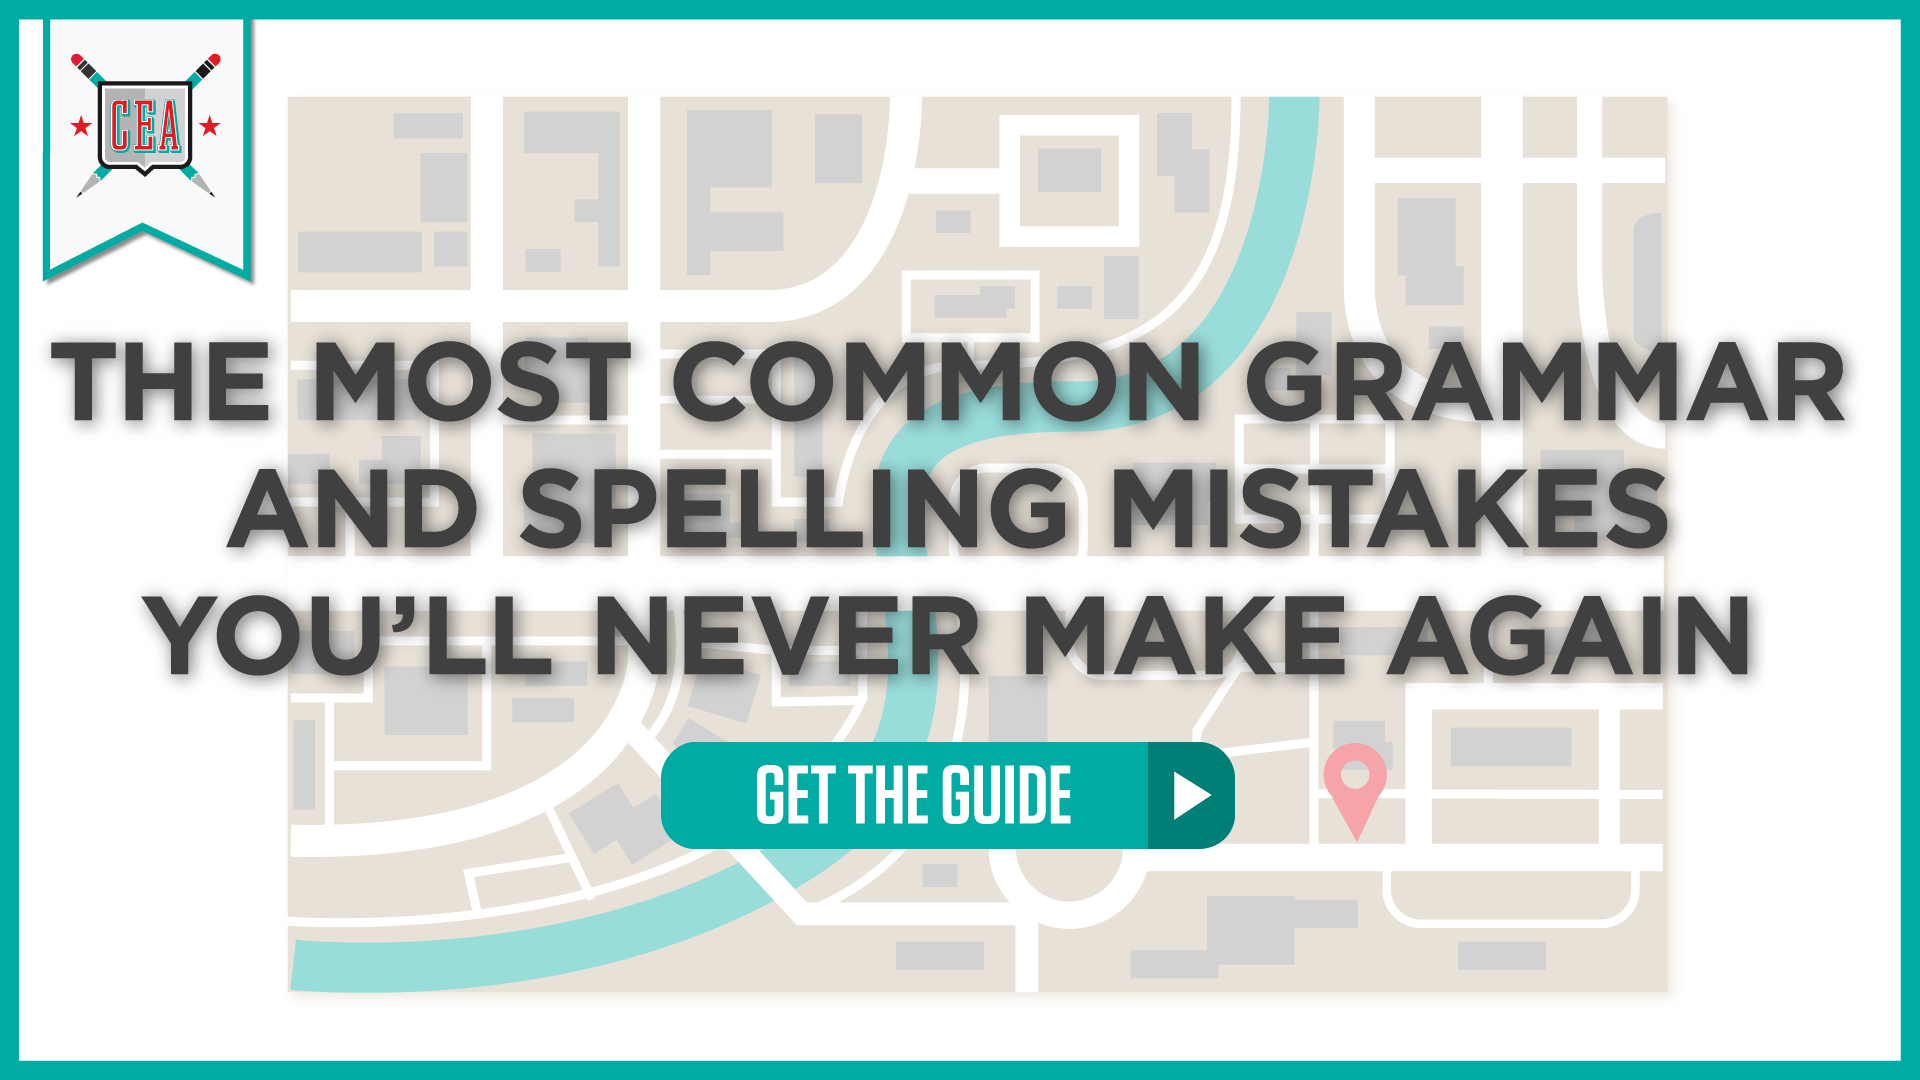 The Most Common Grammar and Spelling Mistakes You’ll Never Make Again